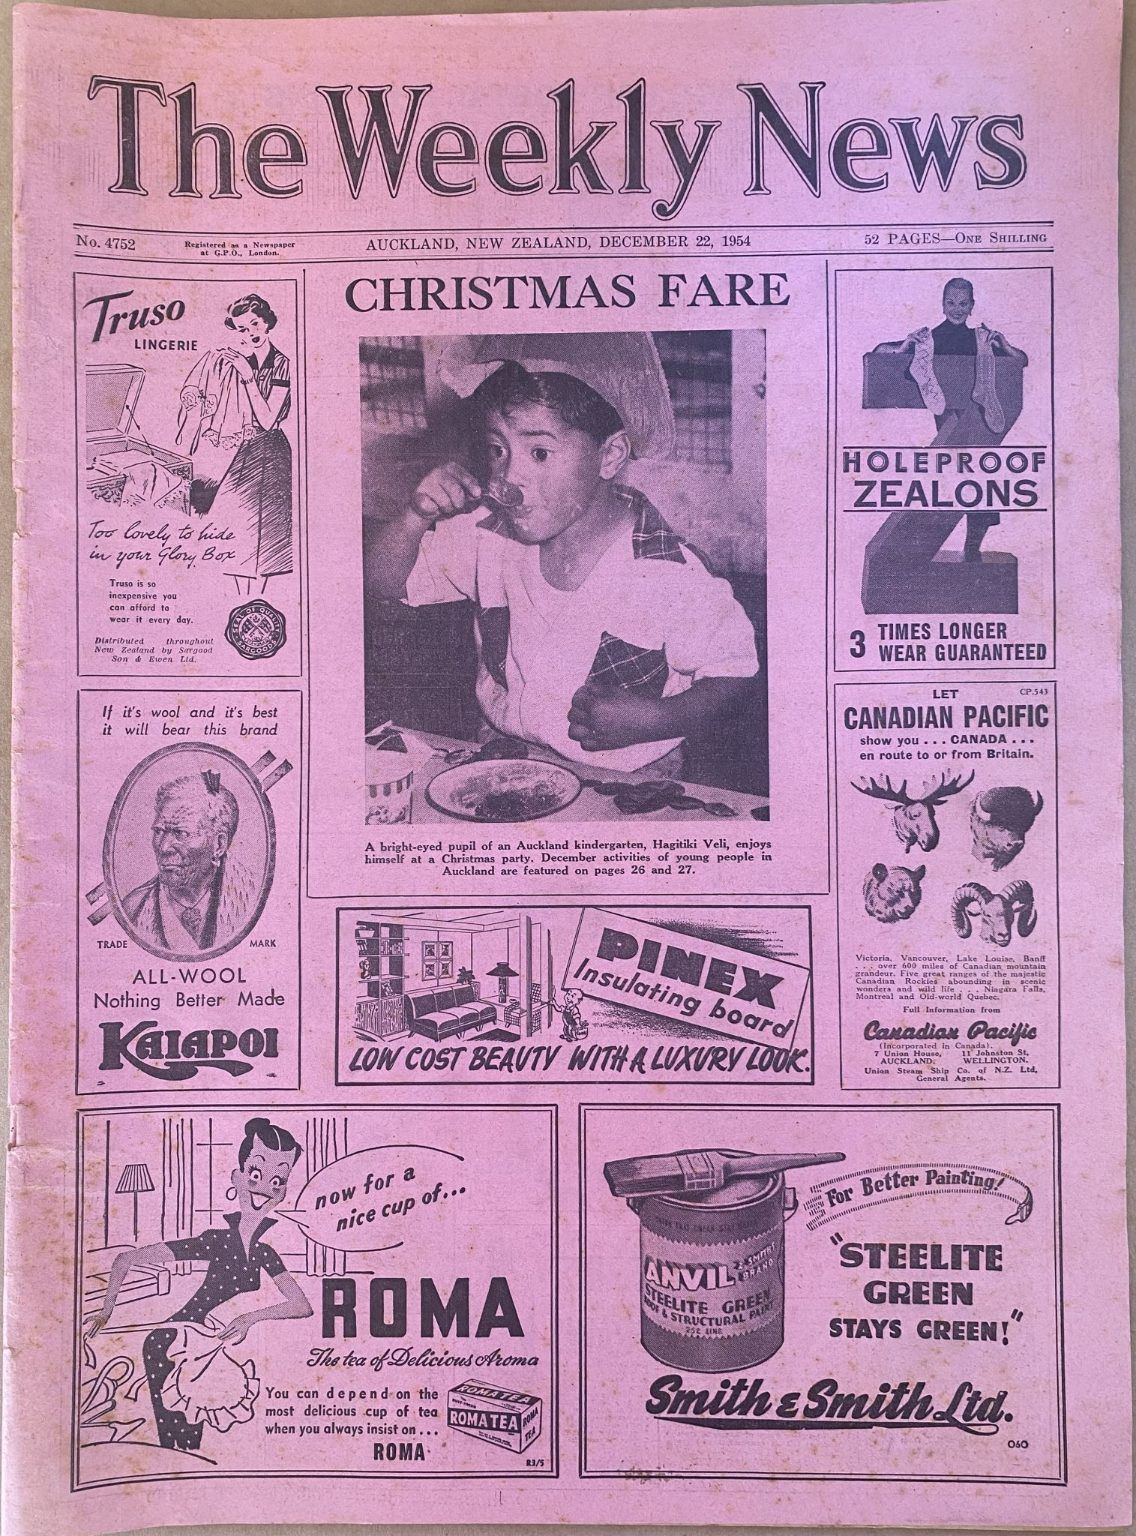 OLD NEWSPAPER: The Weekly News - No. 4752, 22 December 1954